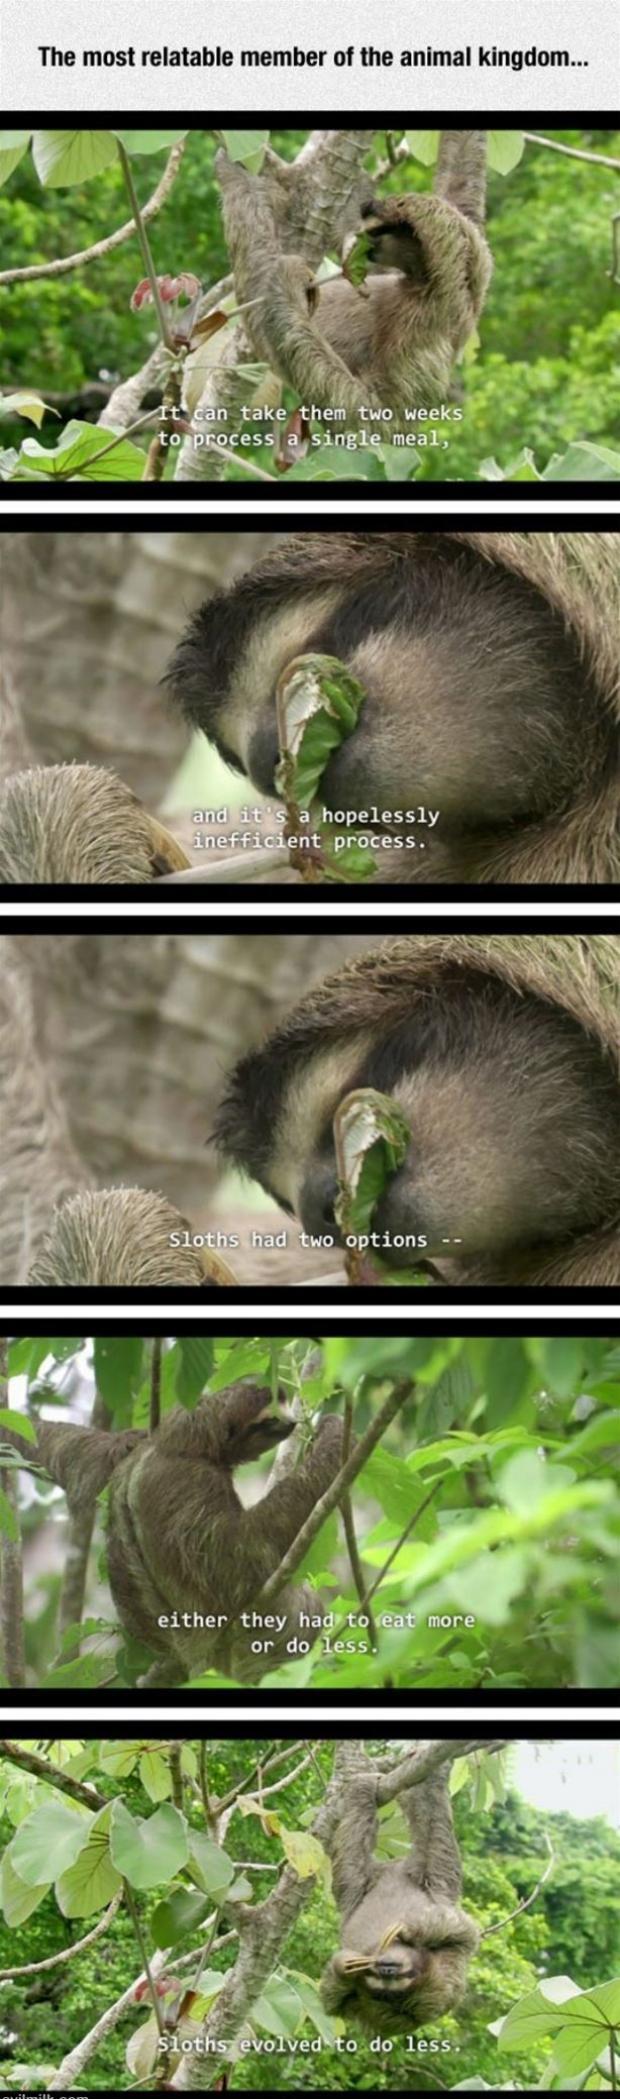 Sloths are great